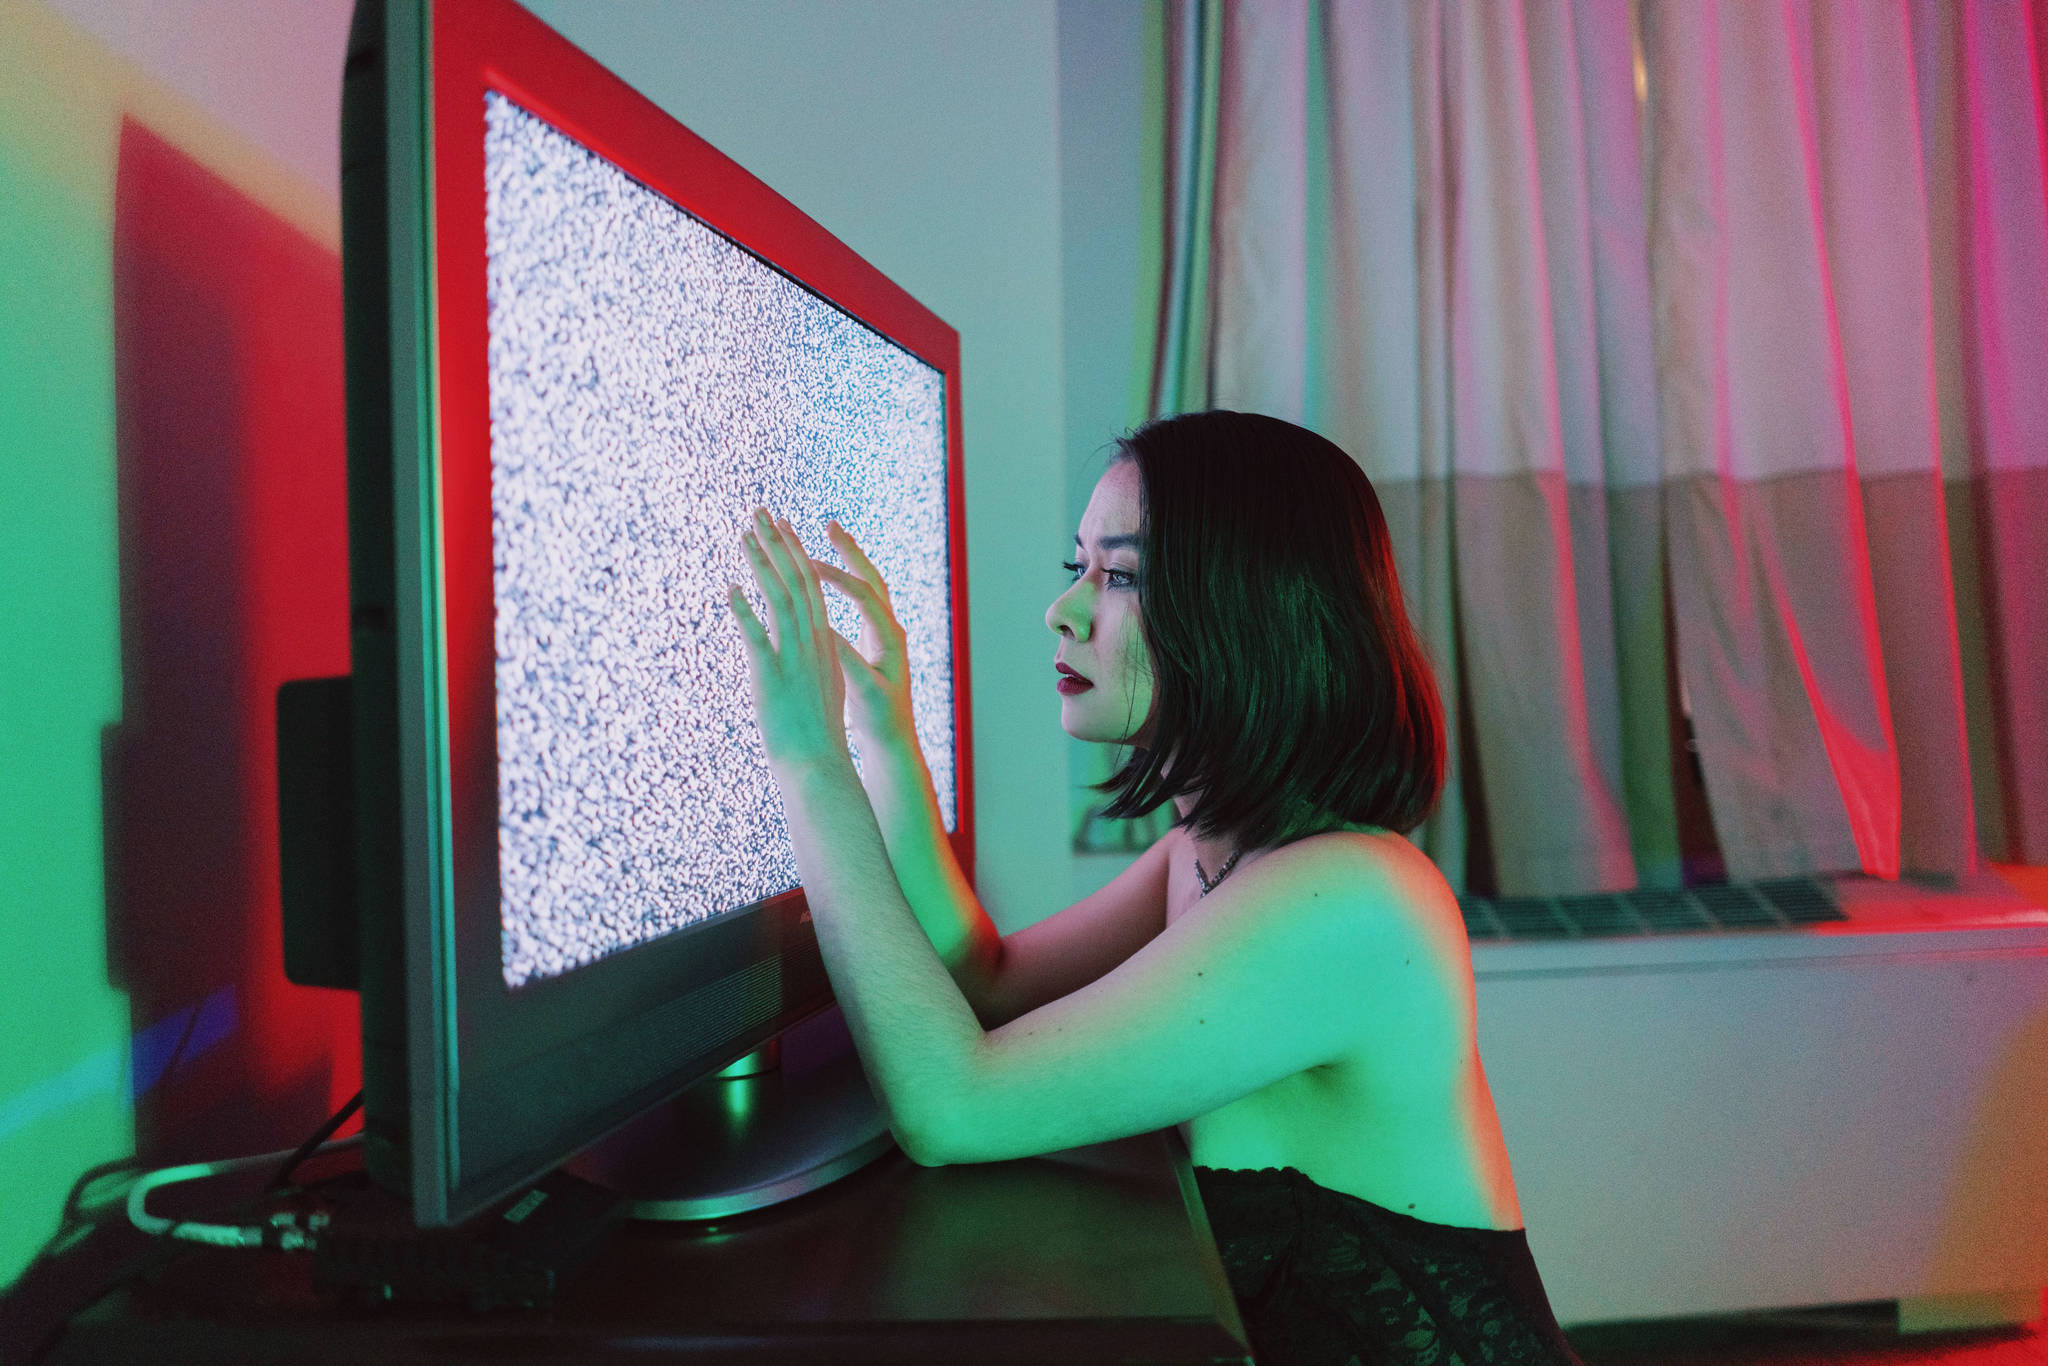 Mitski auditioning for a role in a new &lt;em&gt;Poltergeist &lt;/em&gt;film. Photo by Bao Ngo